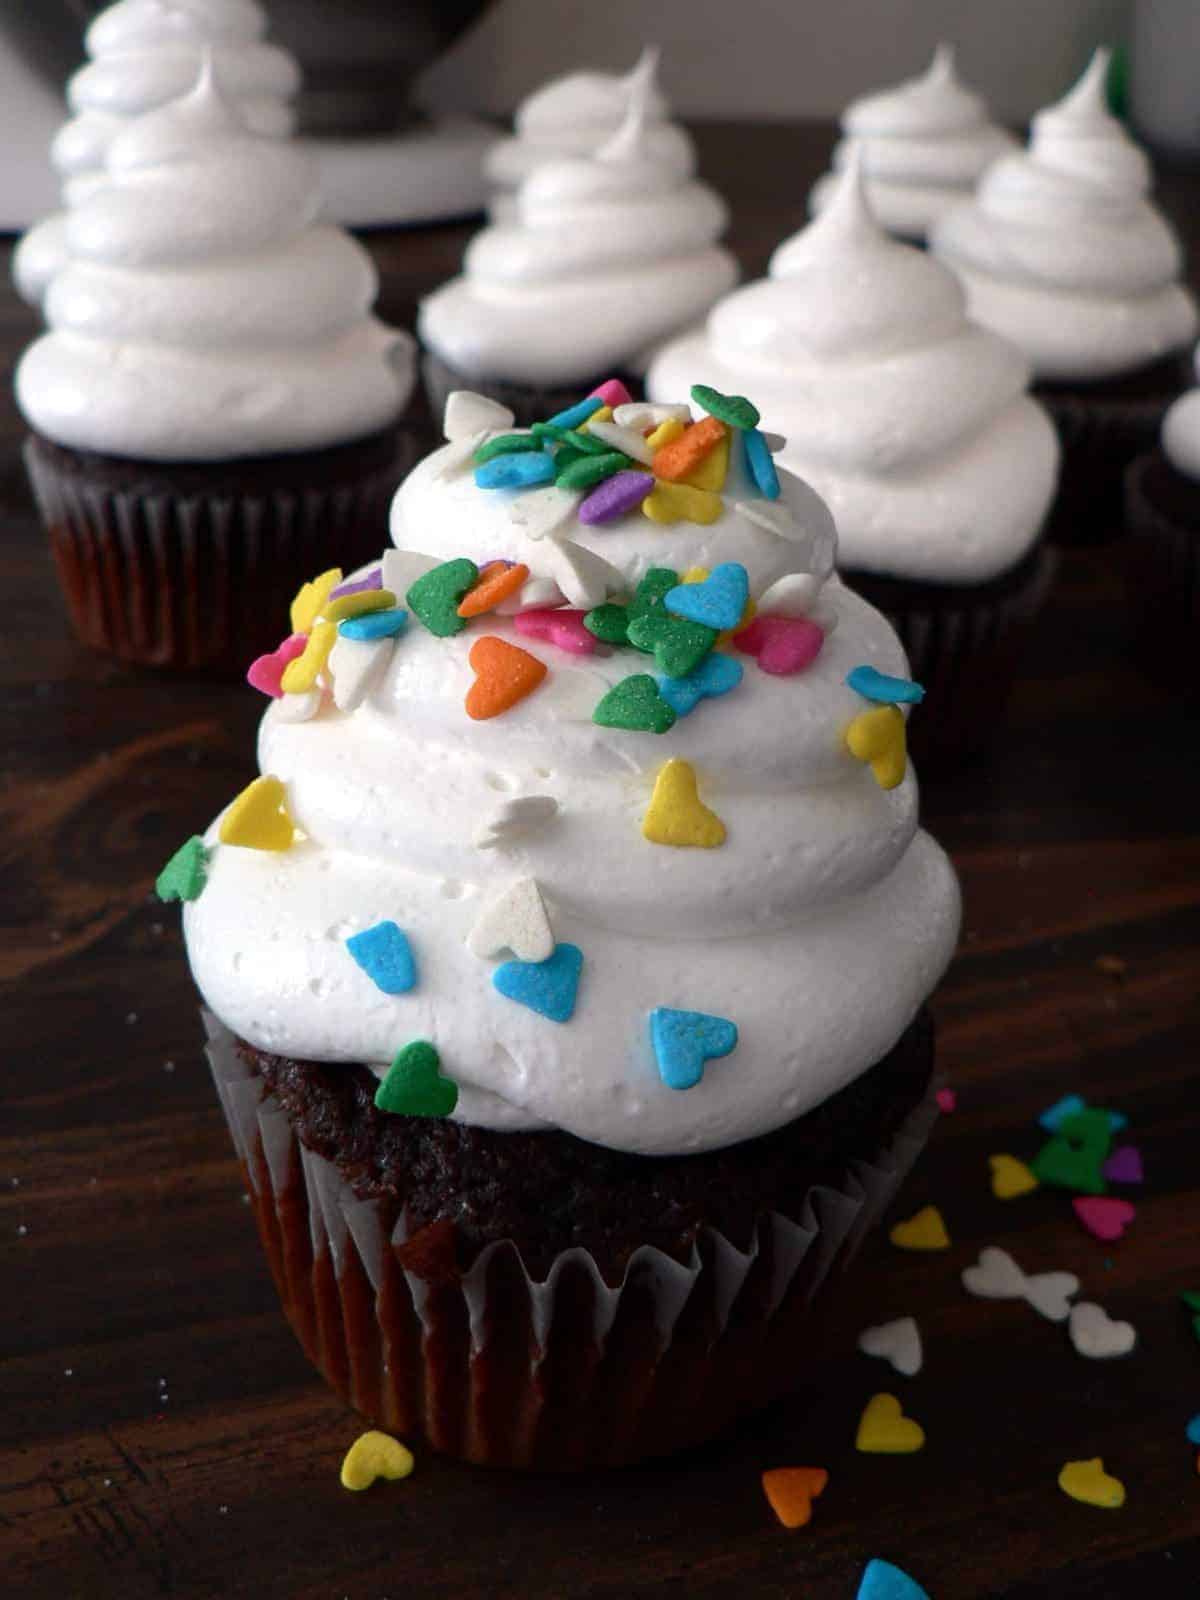 white cloud icing recipe, 7-minute frosting recipe, rocky mountain frosting recipe, light and fluffy marshmallow frosting, meringue frosting how to 